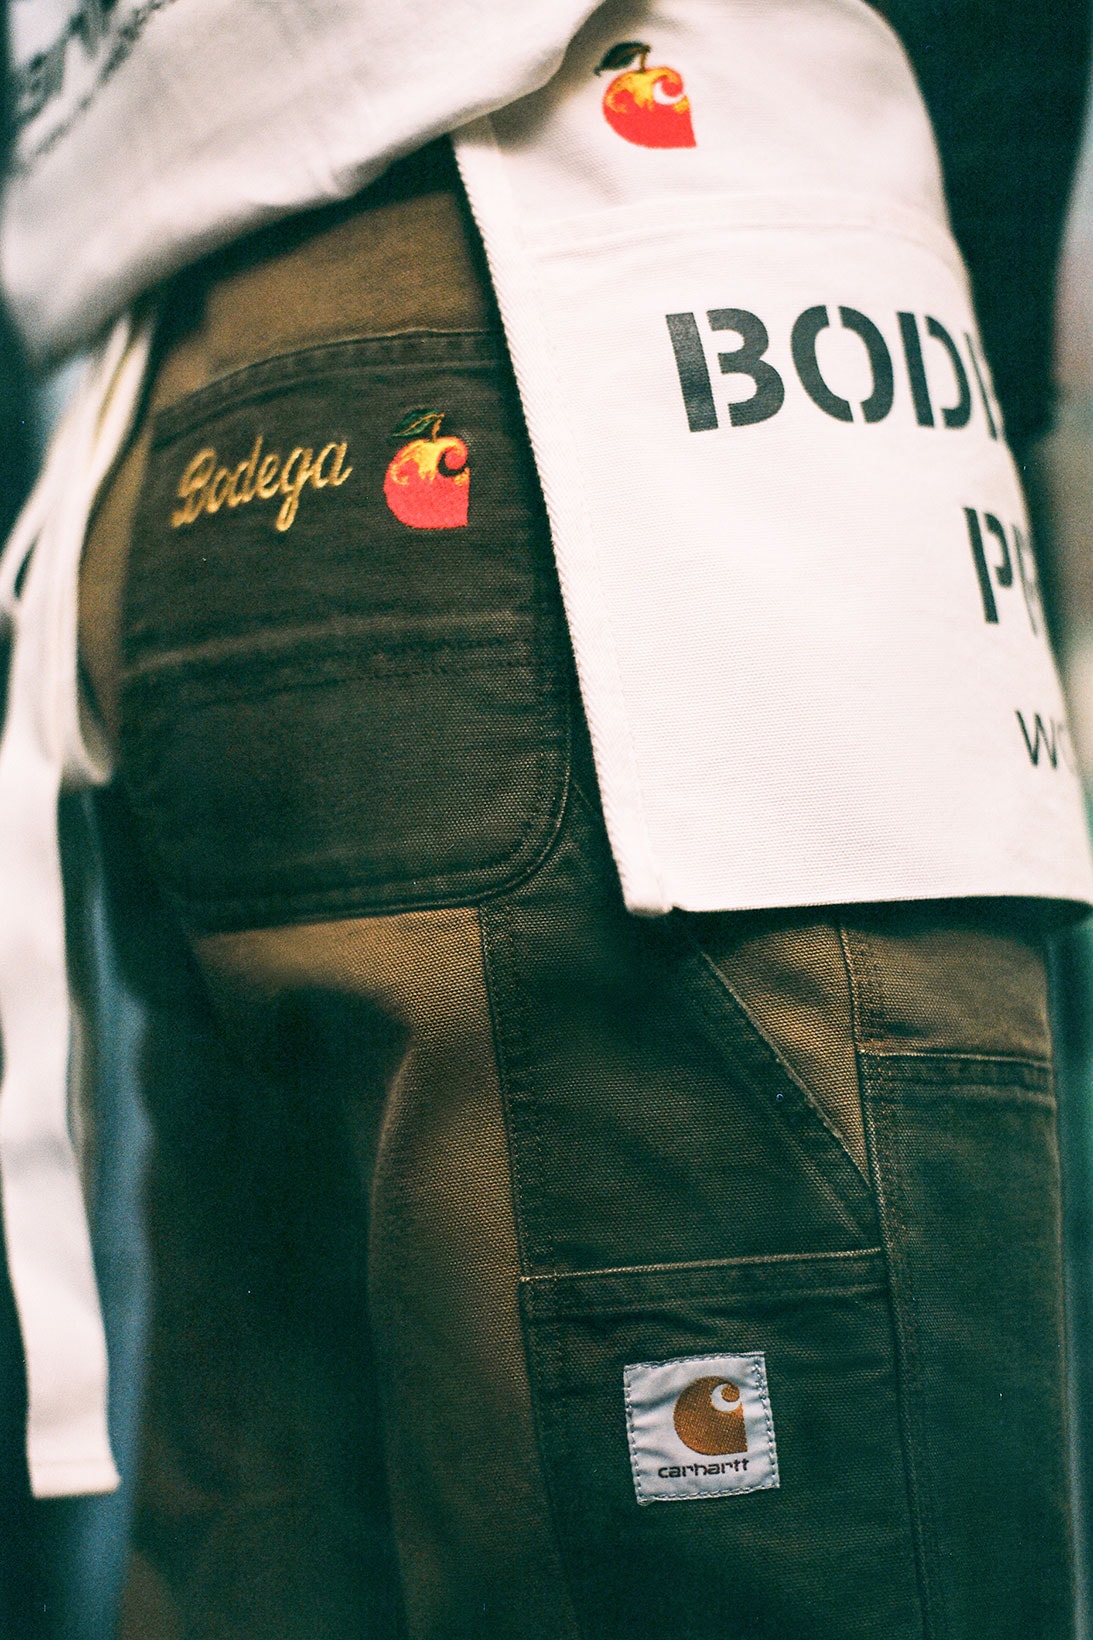 Bodega Carhartt WIP Fall Winter 2021 FW21 Collaboration Collection Campaign Pants Apron